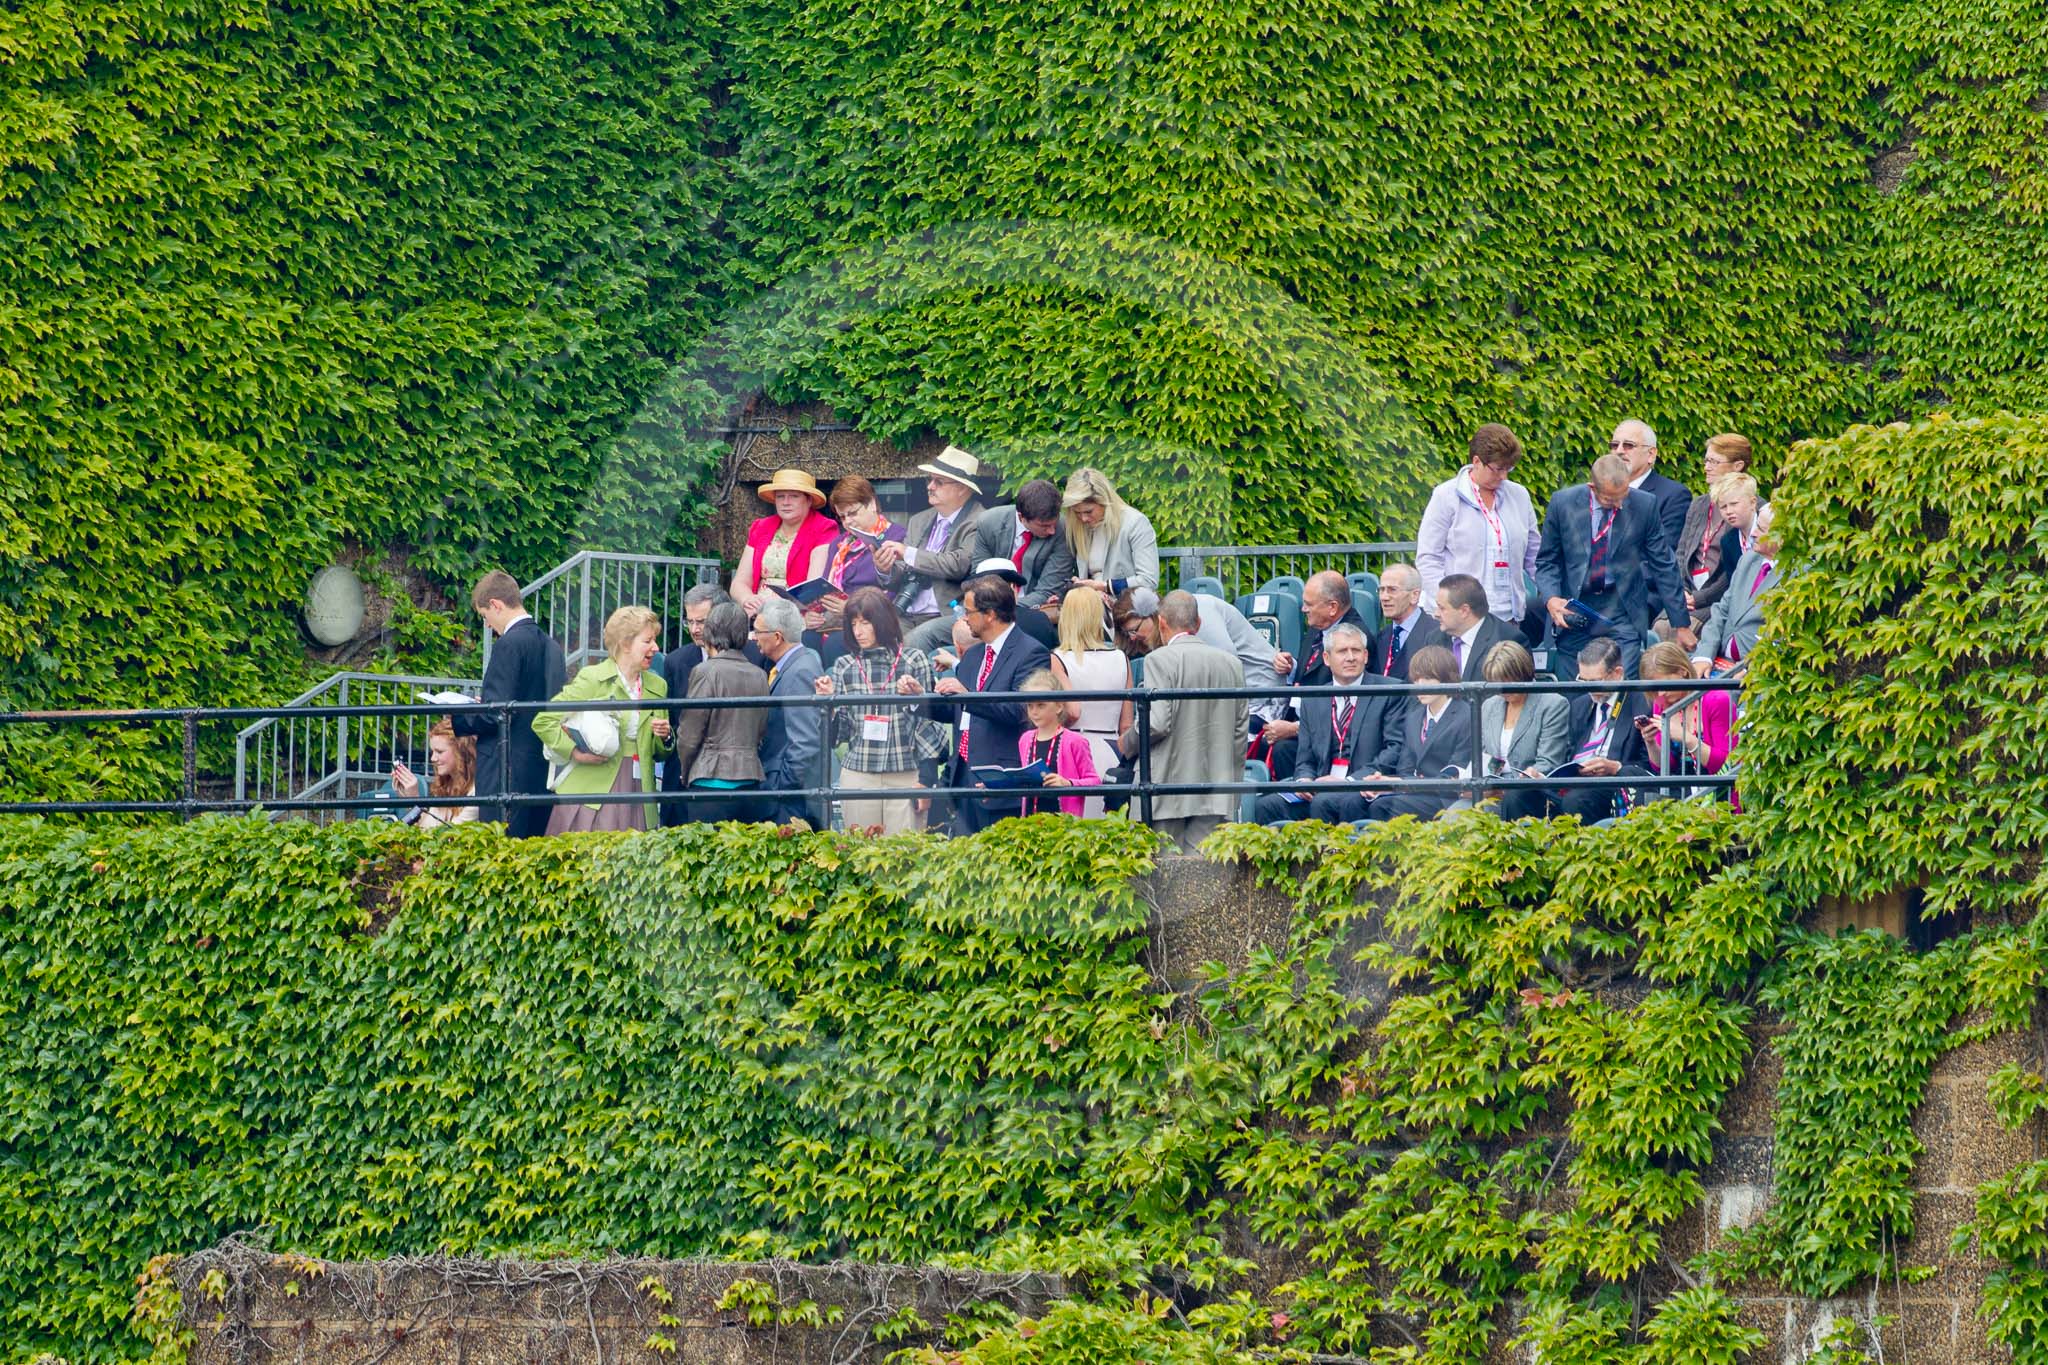 Trooping the Colour 2011: Spectators watching 'Trooping the Colour' from the Citadel, the ivy-covered wartime bunker that is part of the Old Admirality Building in Whitehall, facing Horse Guards Parade..
Horse Guards Parade, Westminster,
London SW1,
Greater London,
United Kingdom,
on 11 June 2011 at 10:11, image #9